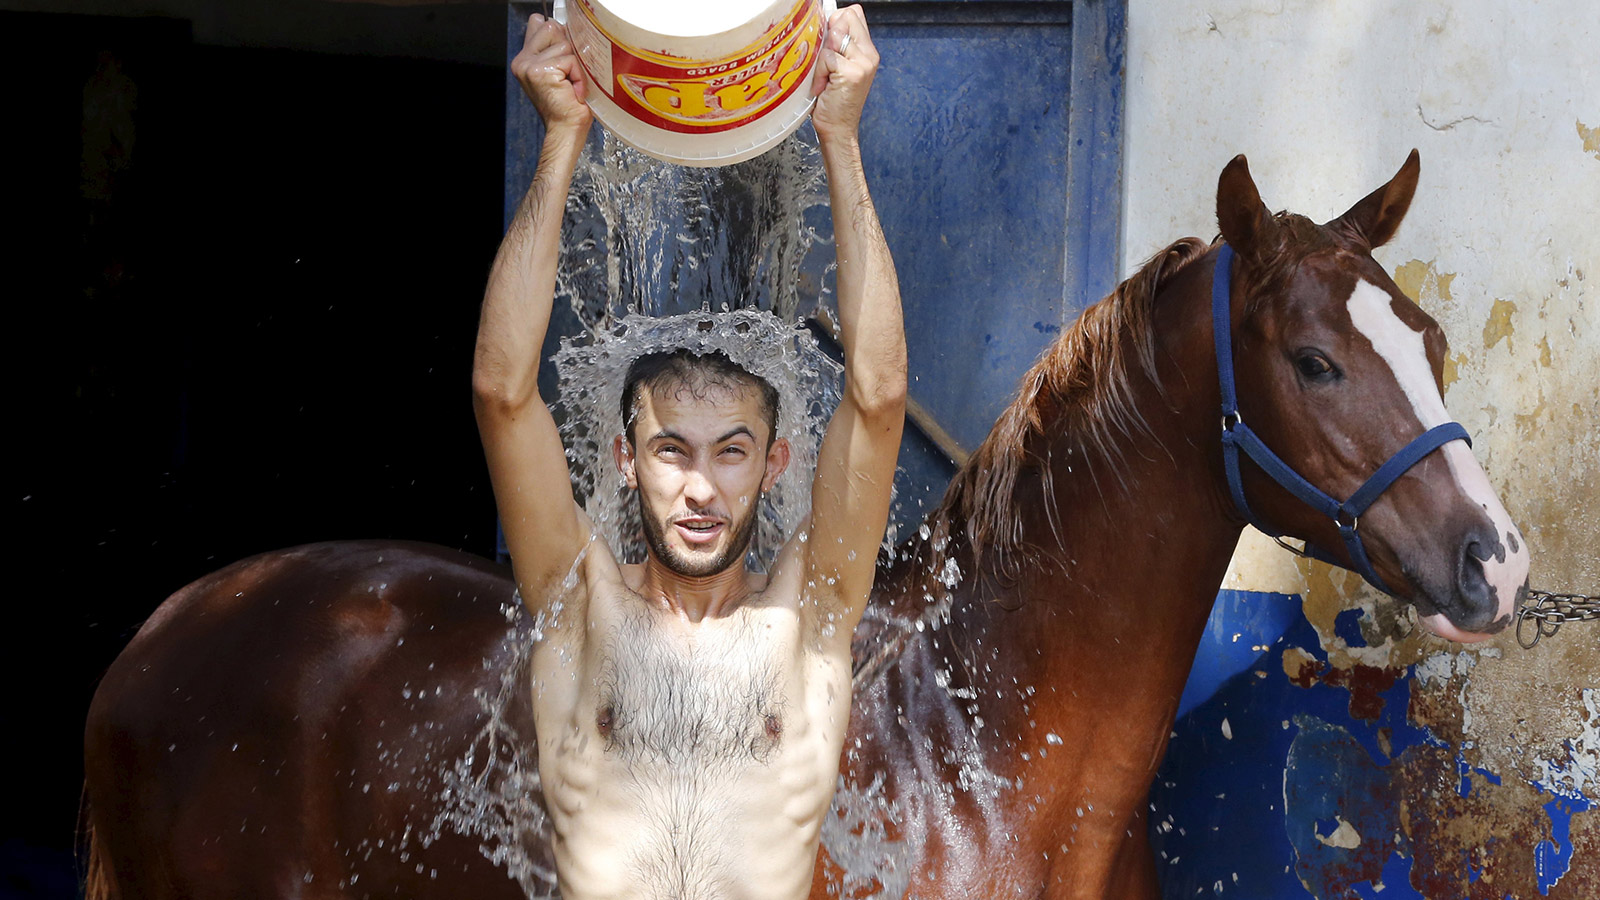 A man pours water over himself while washing a horse in order to cool it down as part of measures taken to ease the effect of a heatwave at the Beirut Hippodrome, Lebanon August 4, 2015.